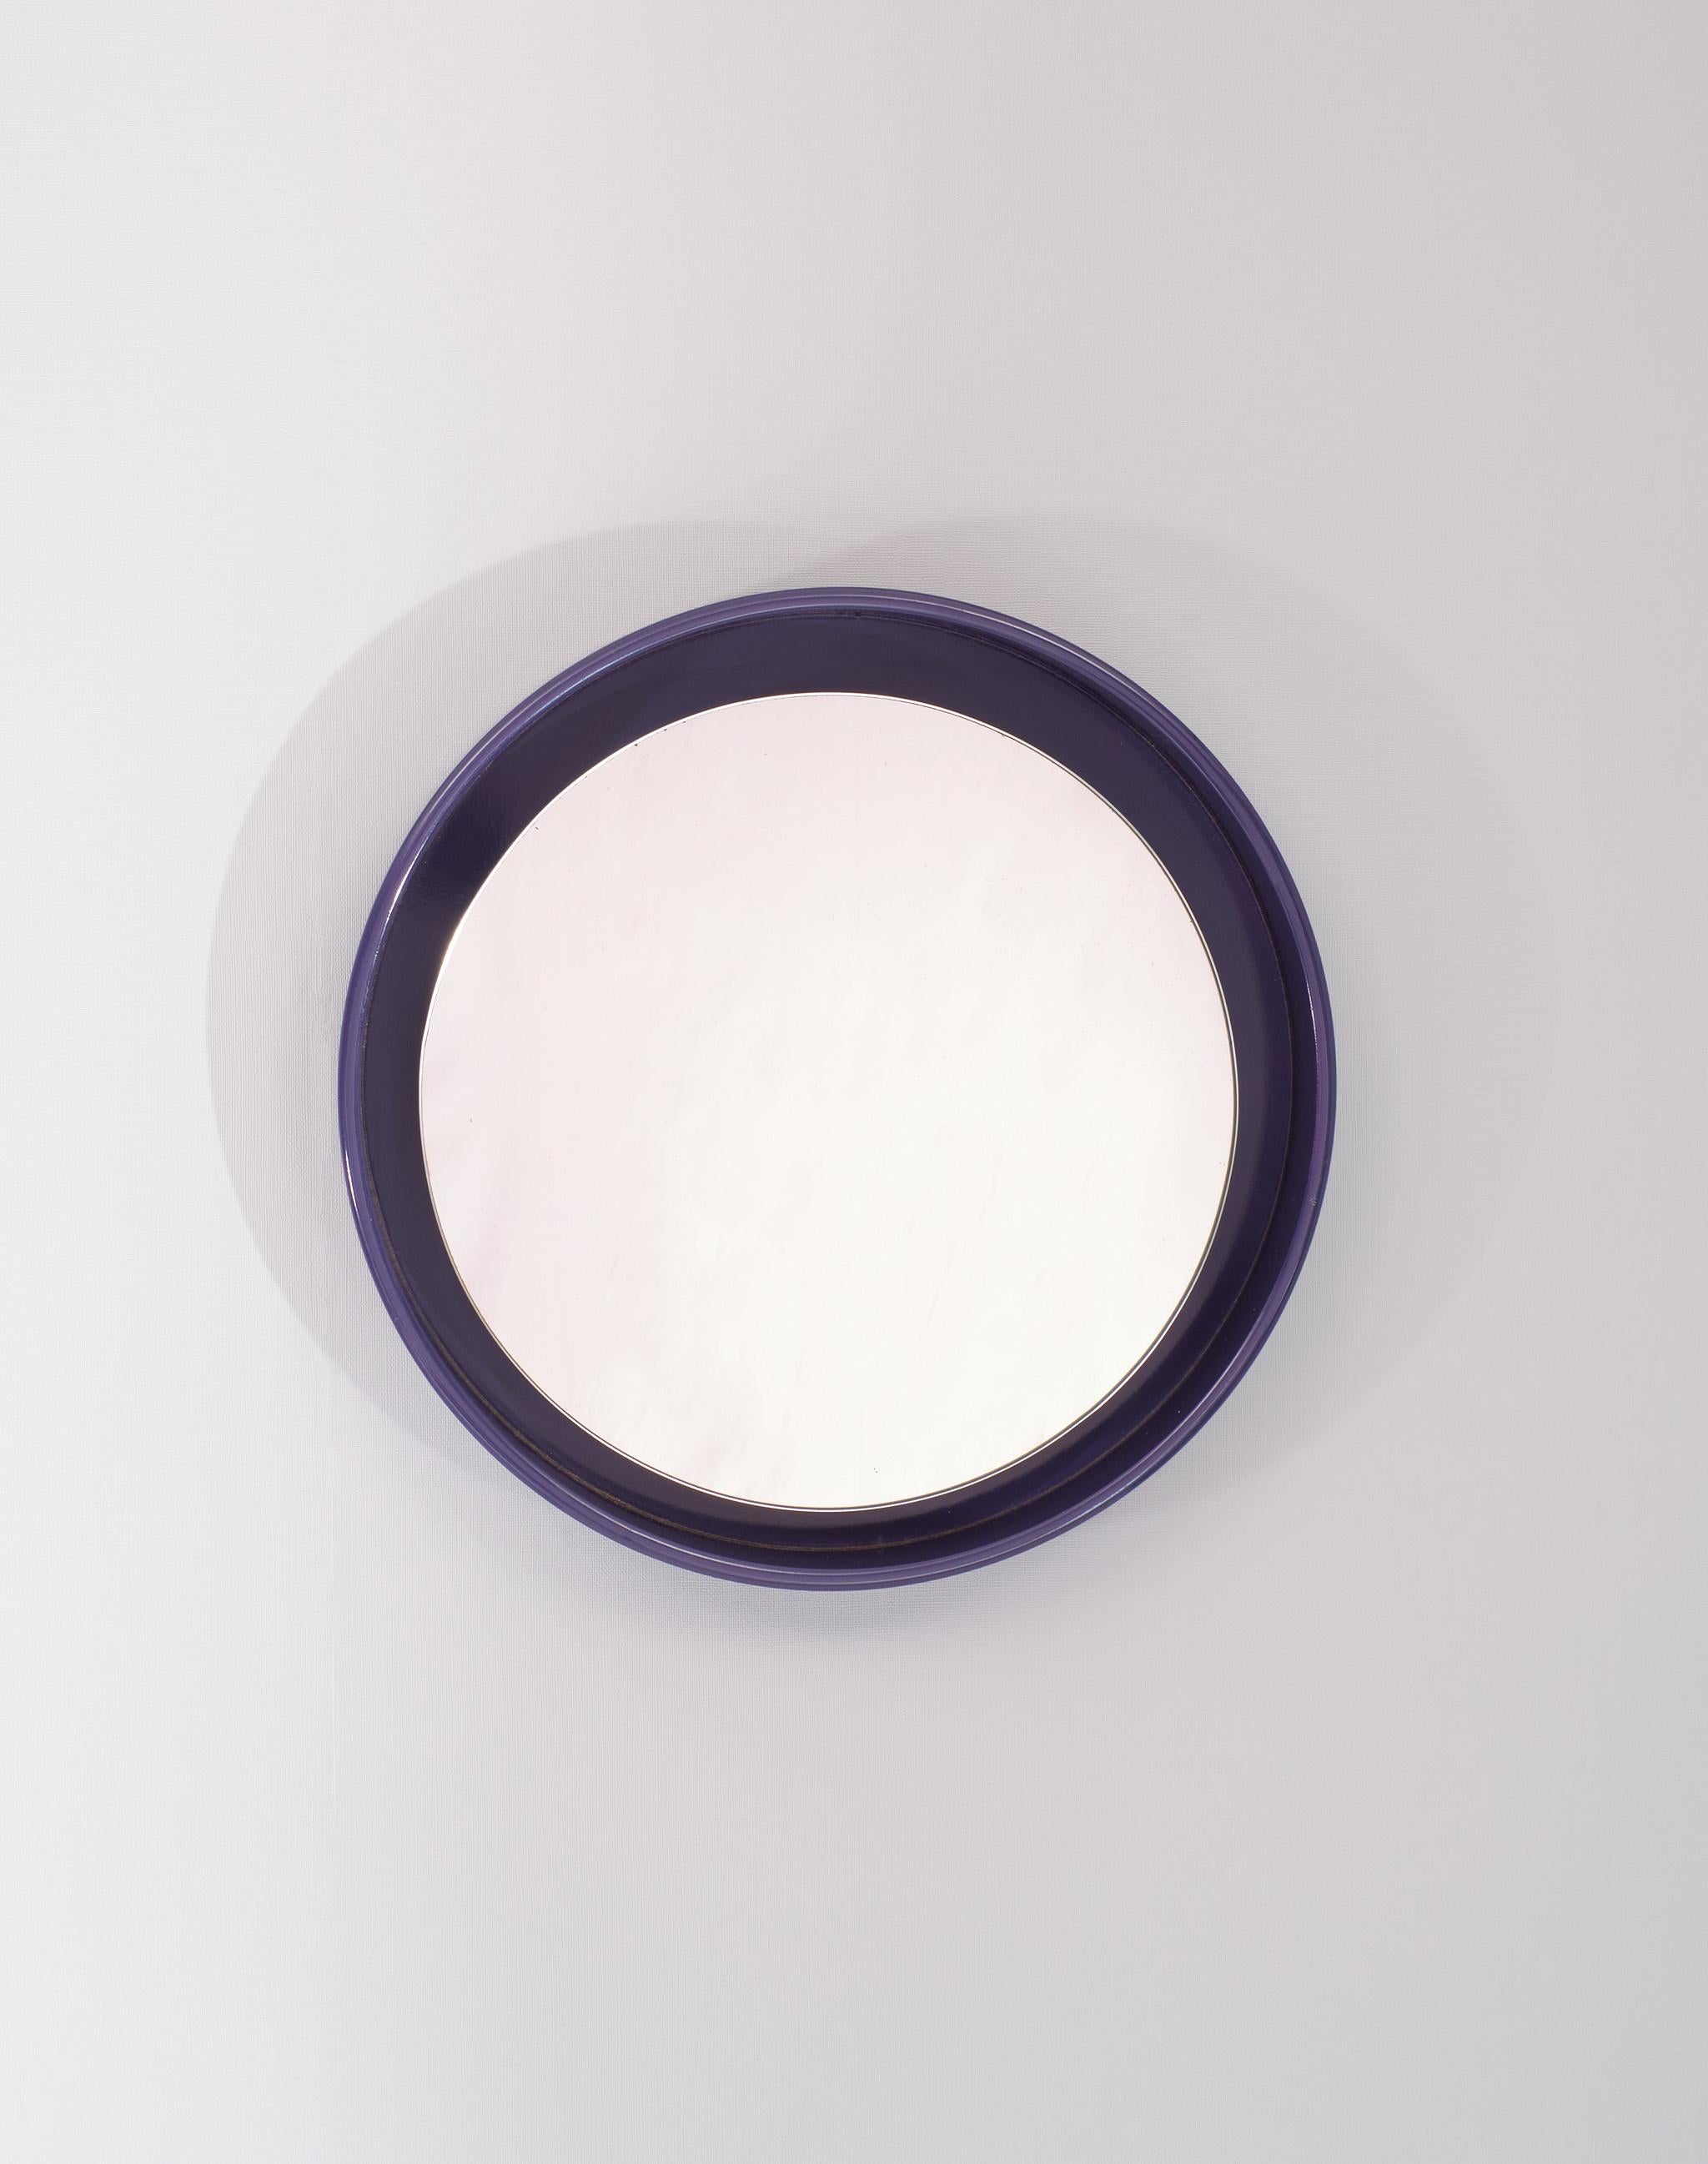 Very nice Round  Mirror .Purple color . The mirror itself is a little off center
Its  intended . Very good quality . Signed Nebu Holland 